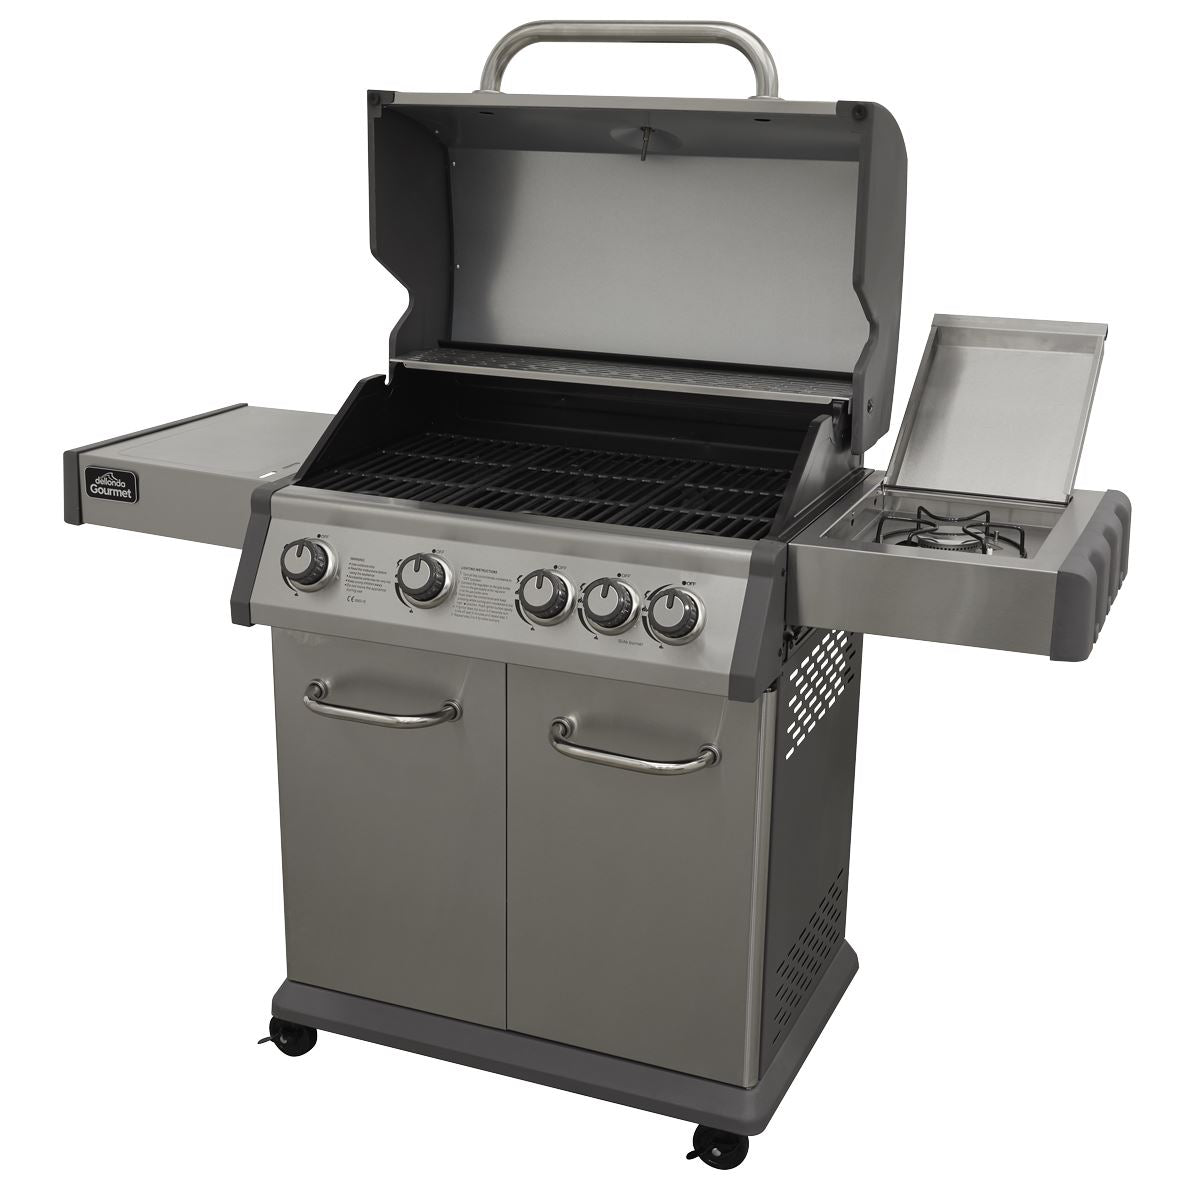 Dellonda 4+1 Burner Deluxe Gas BBQ Grill, Stainless Steel, Side Burner, Ignition